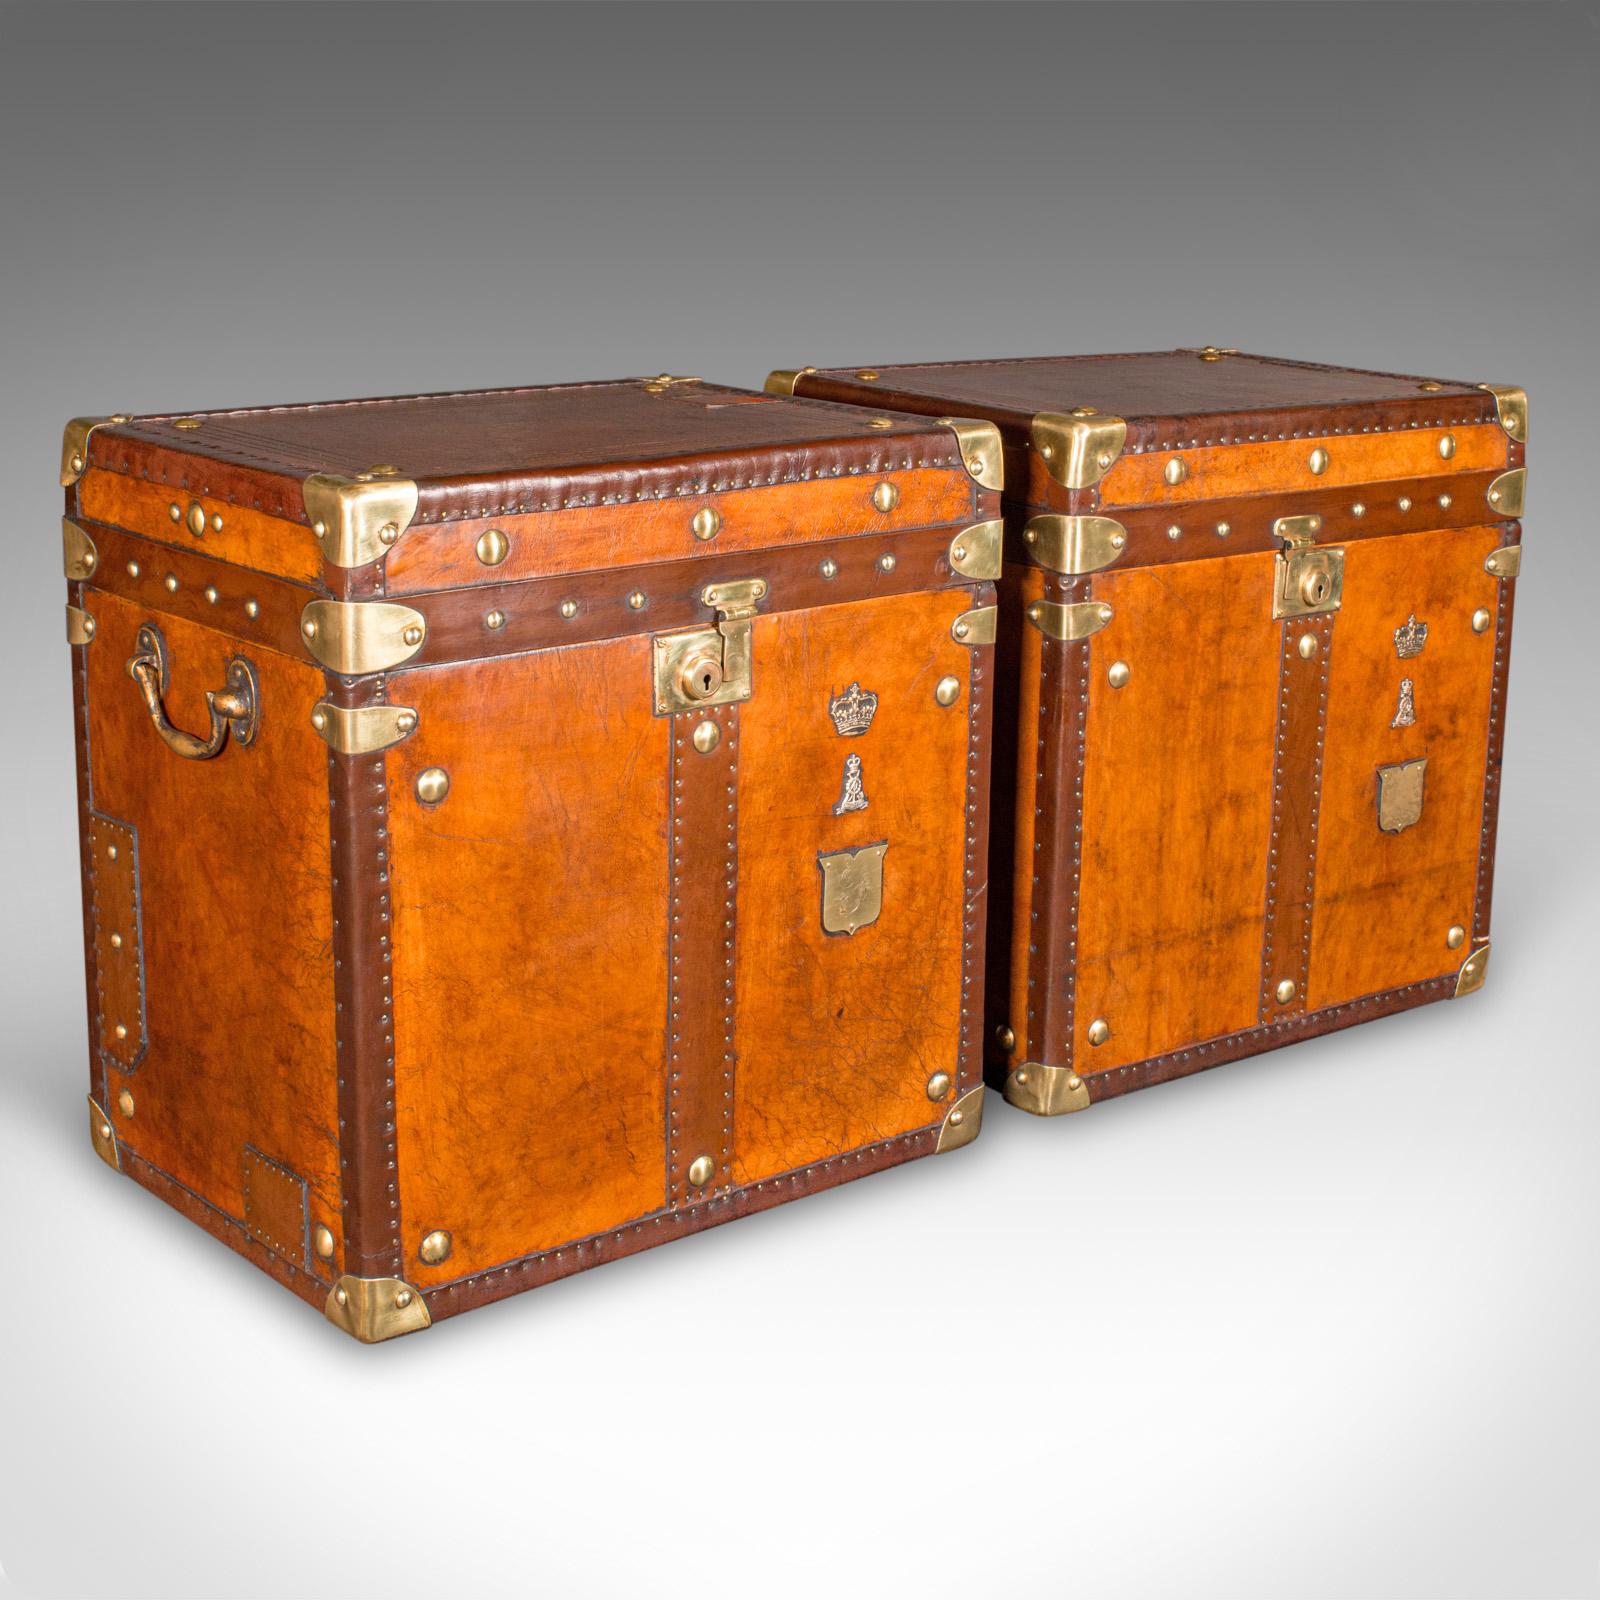 This is a pair of vintage campaign luggage cases. An English, leather and brass bedside nightstand, dating to the late 20th century, circa 1980.
 
Superb casework, with beautifully appointed detail and finishes
Displaying a desirable aged patina and